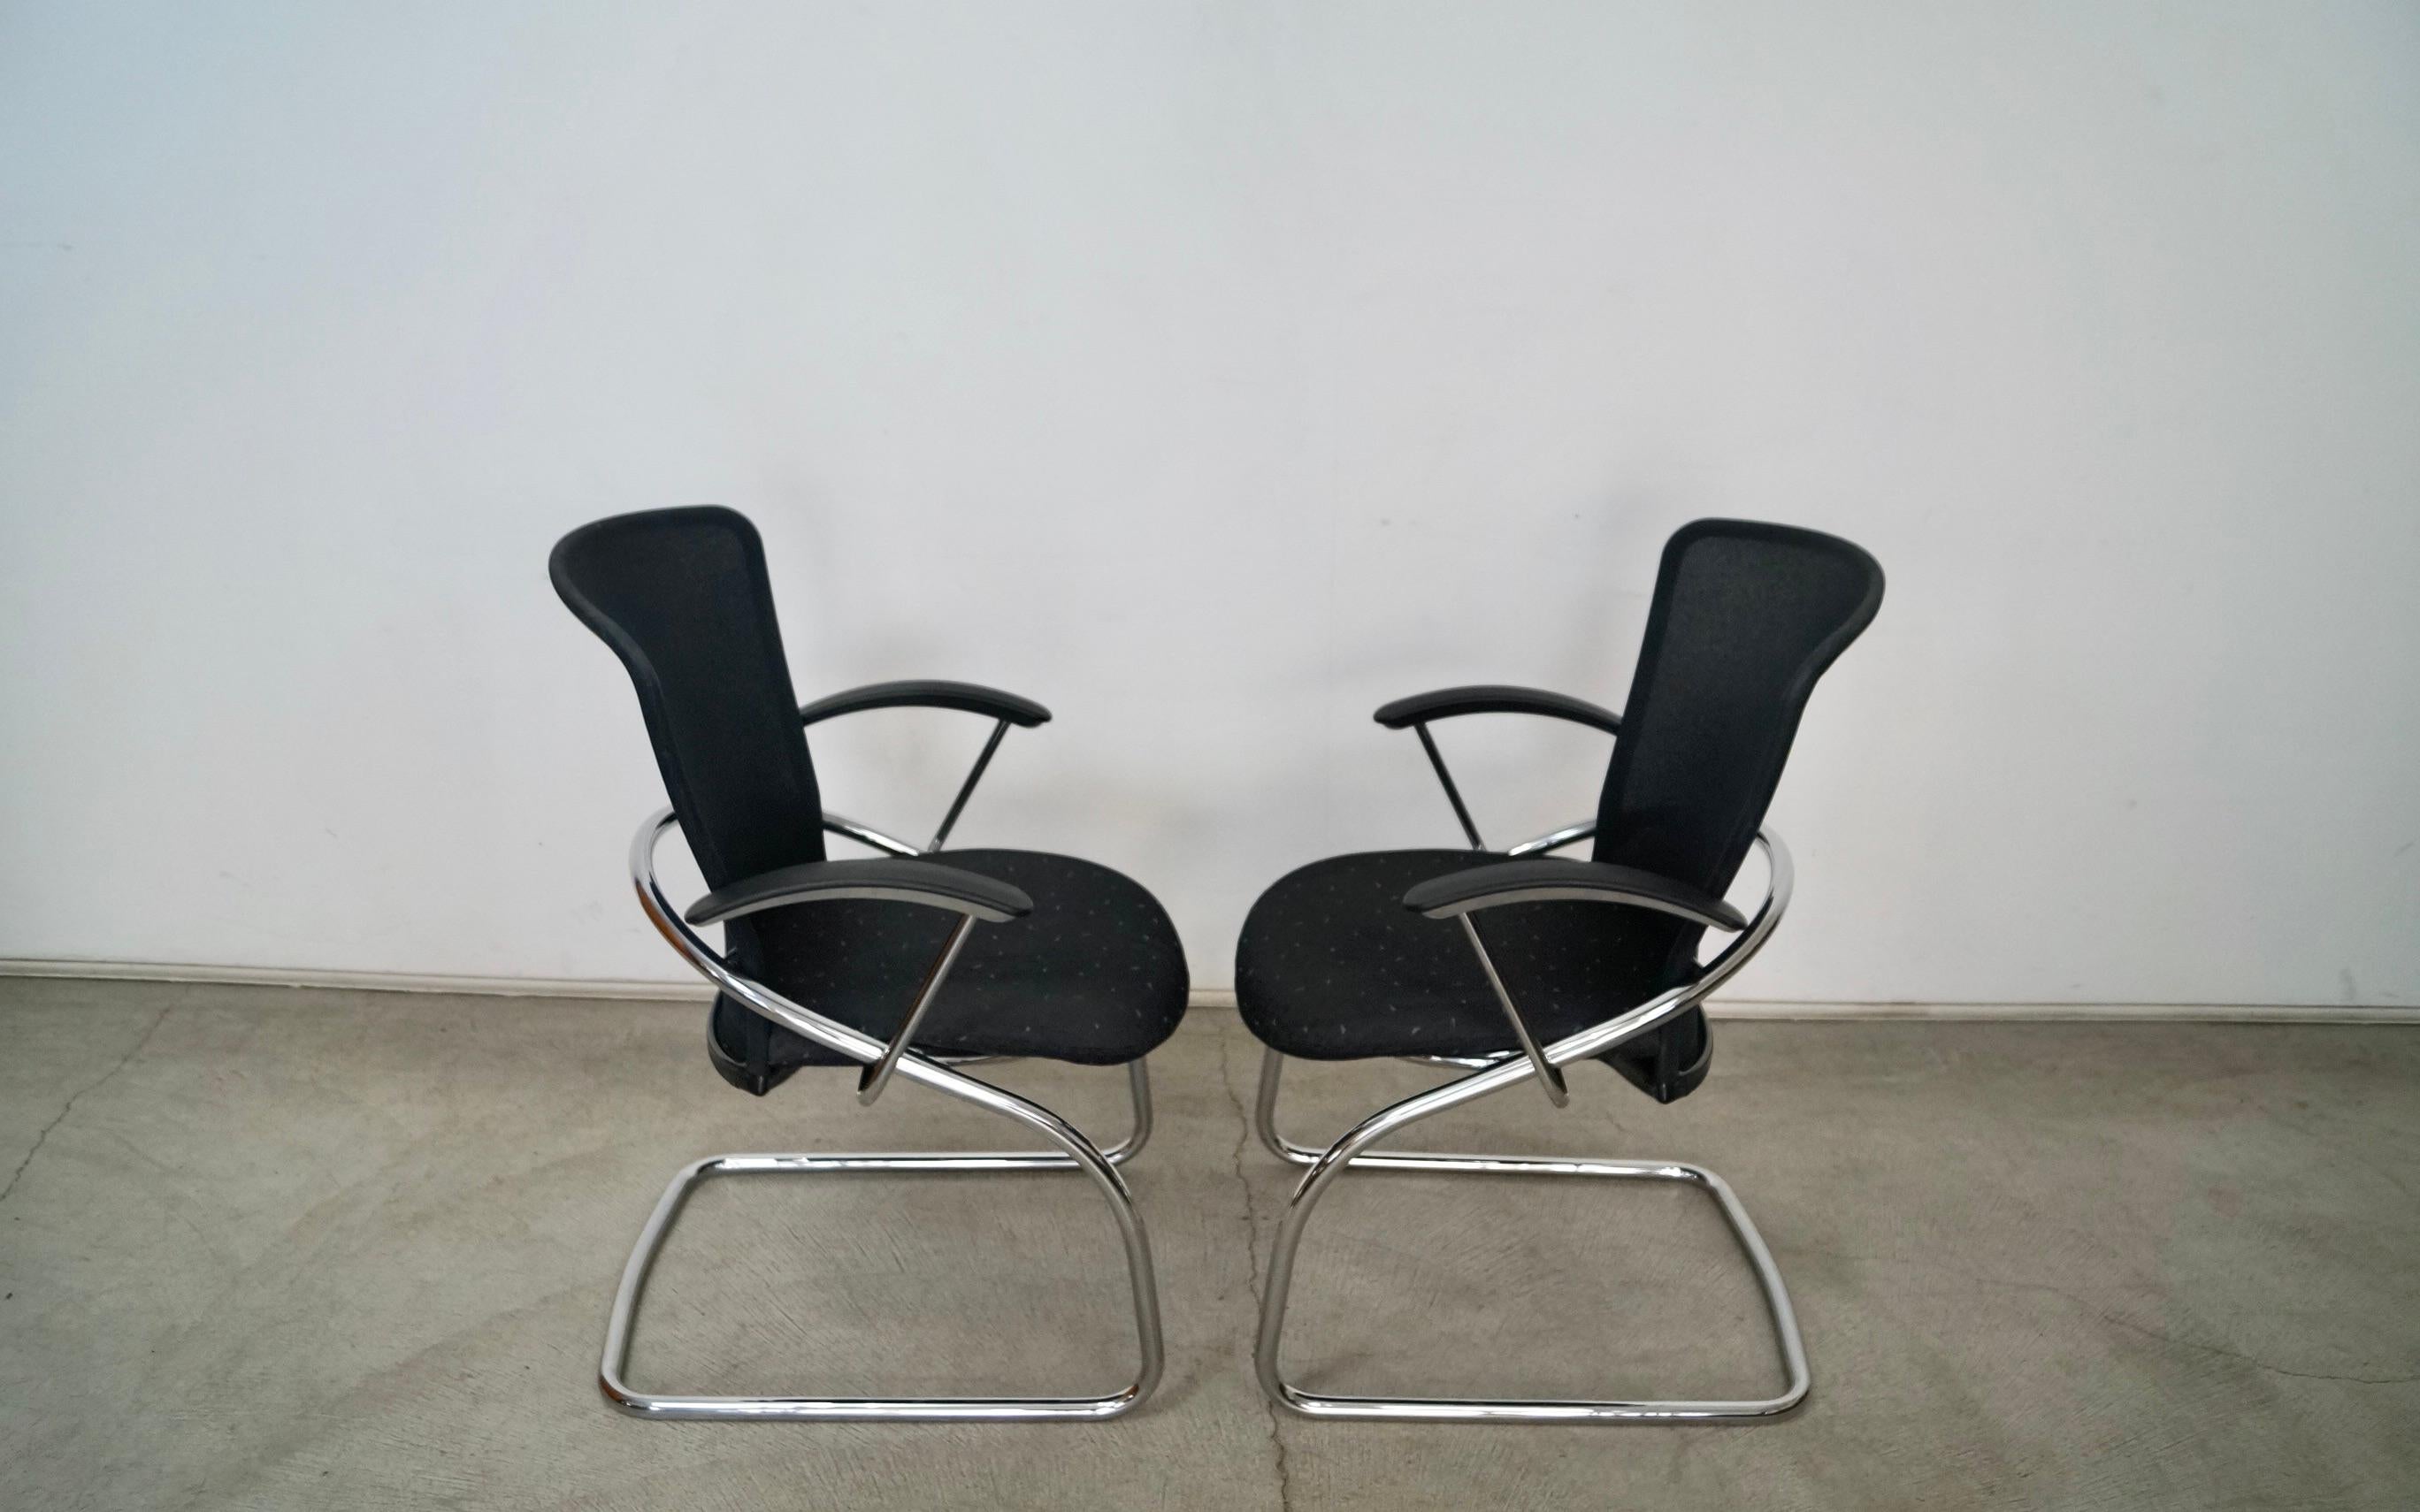 1990's Postmodern German Chrome Cantilever Arm Chairs - A Pair For Sale 4